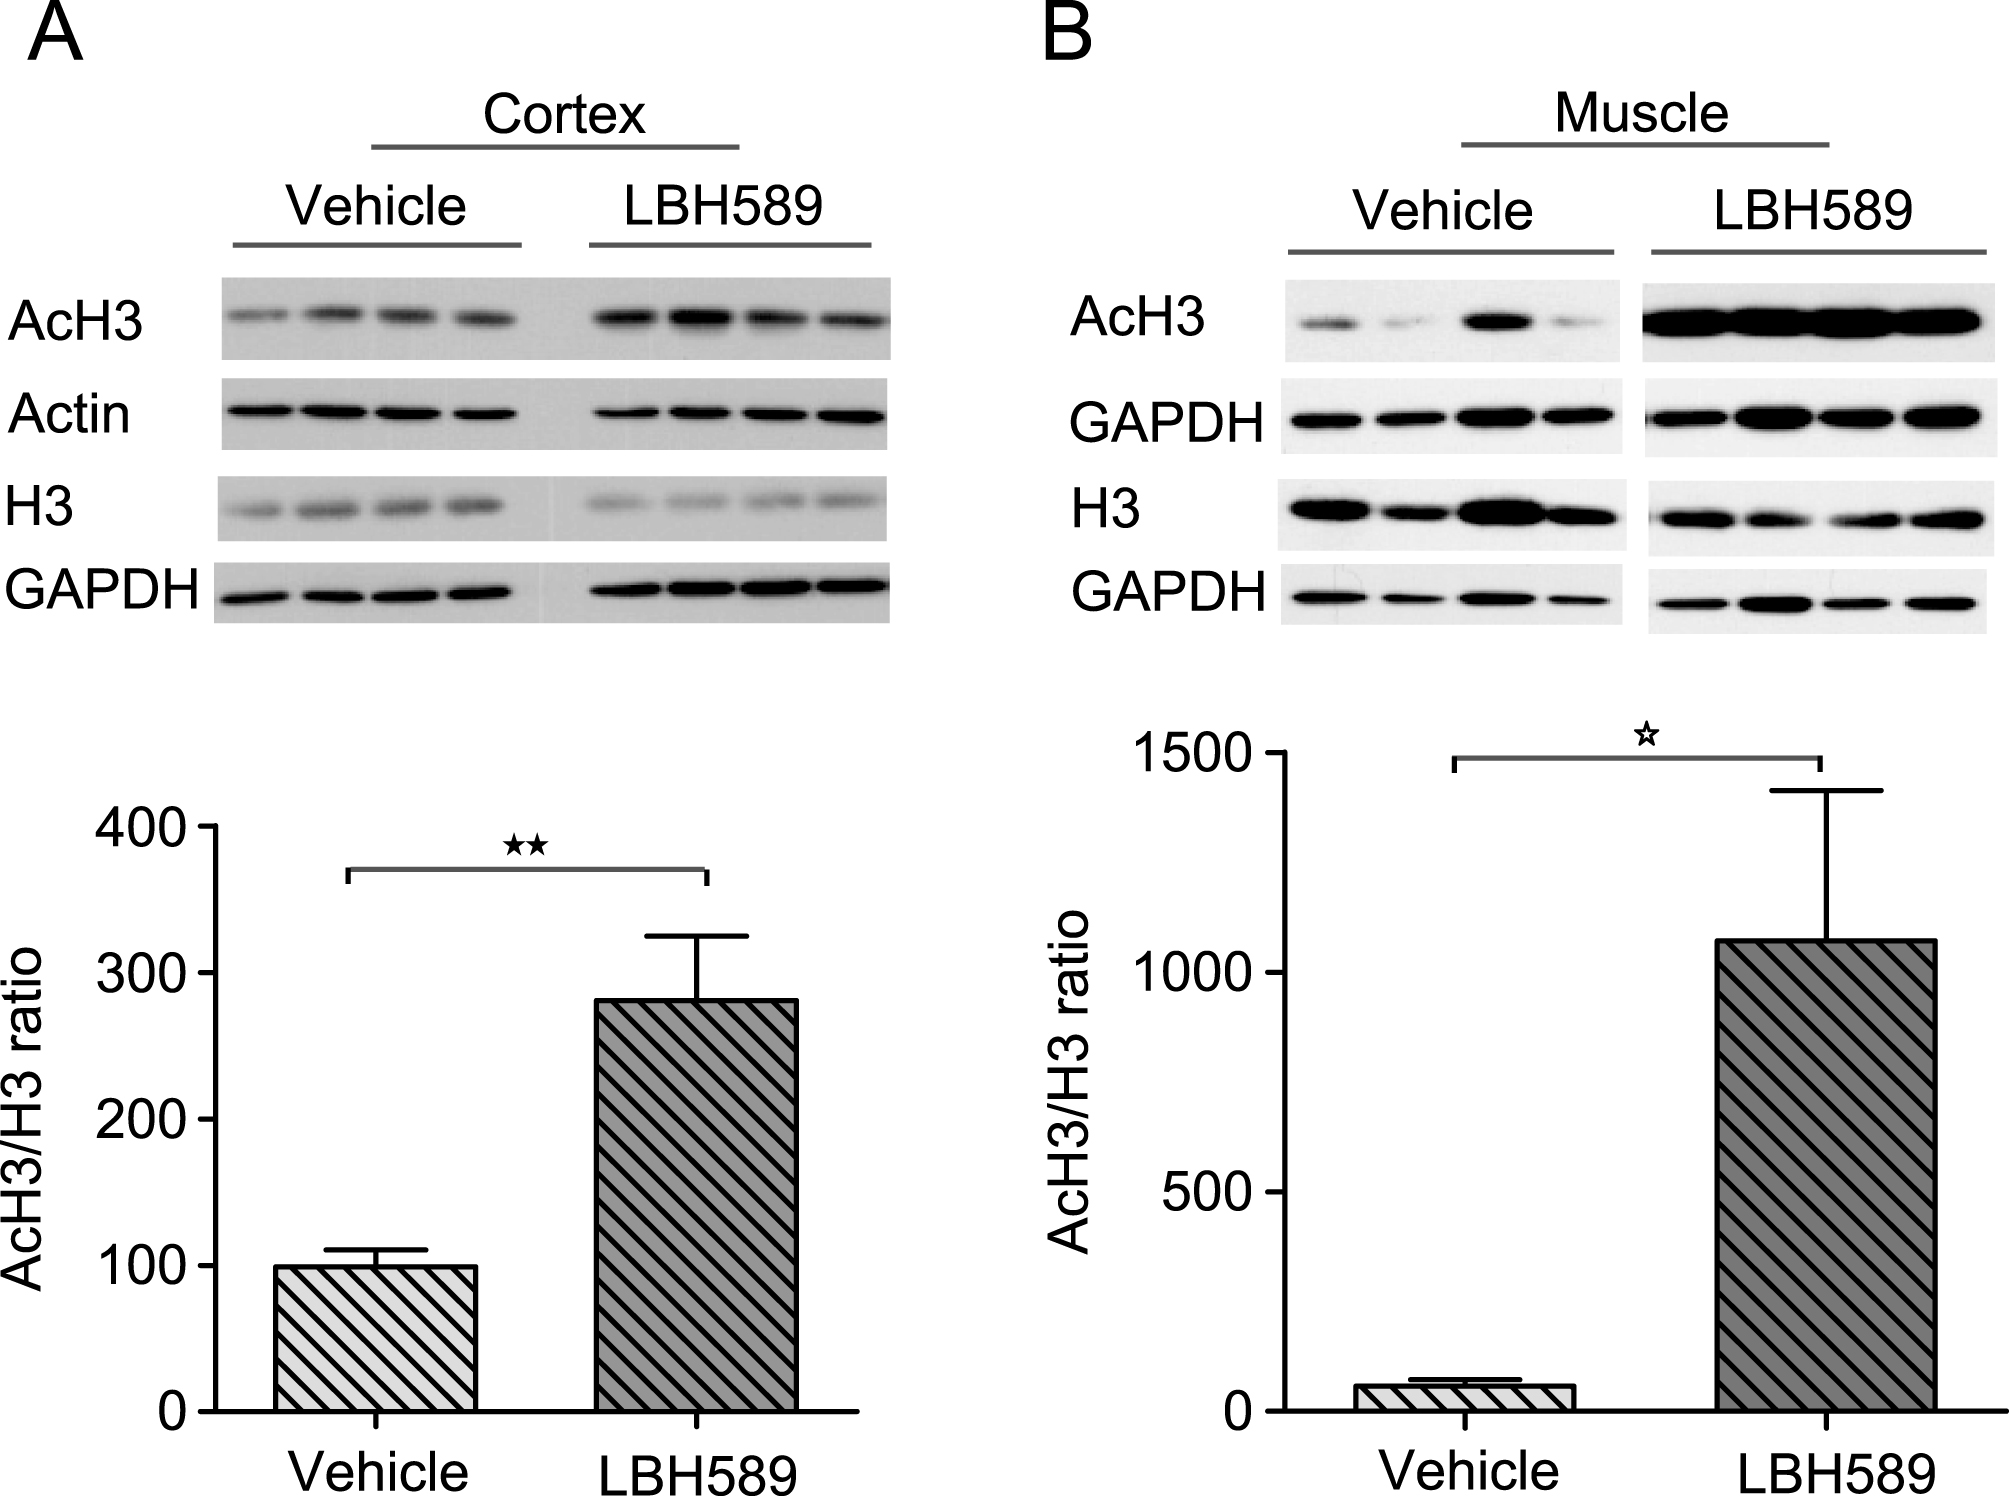 Pharmacodynamic response with LBH589 treatment. A-B) Western blots showing levels of histone H3 acetylation in cortical tissue (A) and muscle (B) of R6/2 mice treated with LBH589 or vehicle. Mice were treated with LBH589 at the dose rate of 20 mg/kg/three times per week for 3 weeks and acetylation levels were determined two hrs after the last injection. LBH589 treatment significantly increases total H3 acetylation in both brain and muscle tissue. GAPDH and Actin are used as loading controls and the level of AcH3 was normalized to total histone H3 level. n = 4-5. P value *p < 0.05; **p < 0.01. Error bars = S.E.